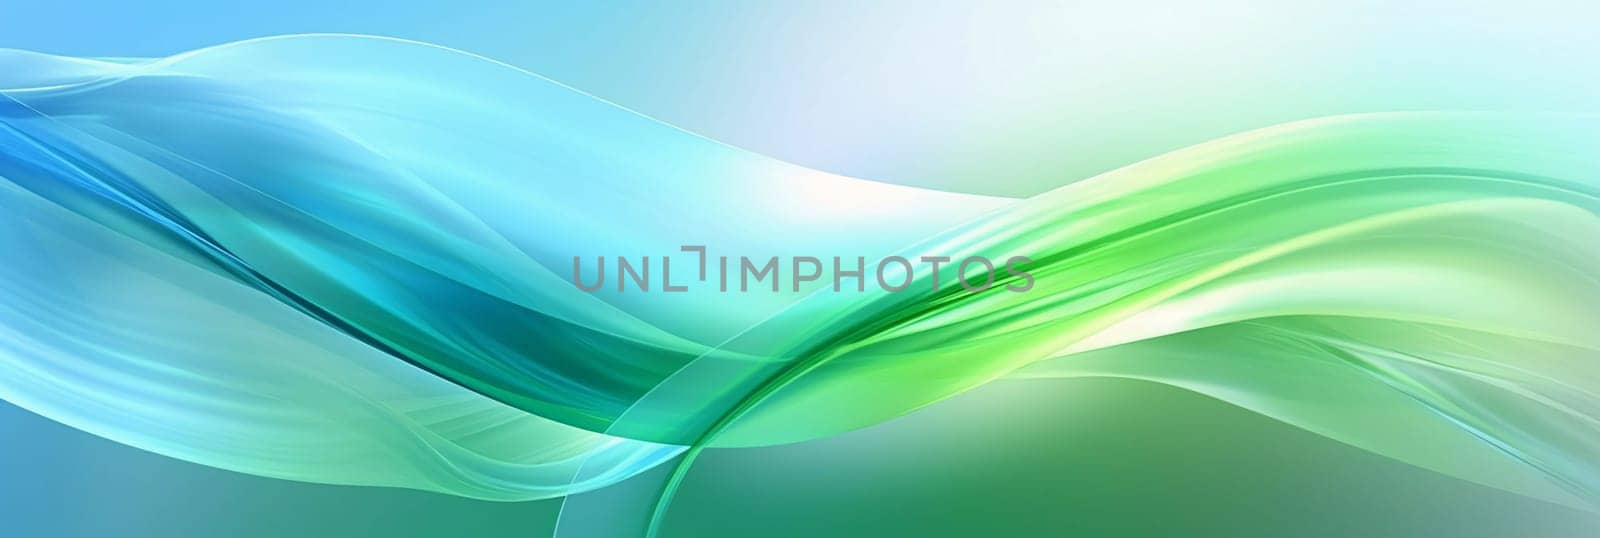 Abstract background design: Abstract background with blue and green wavy lines. Vector illustration.